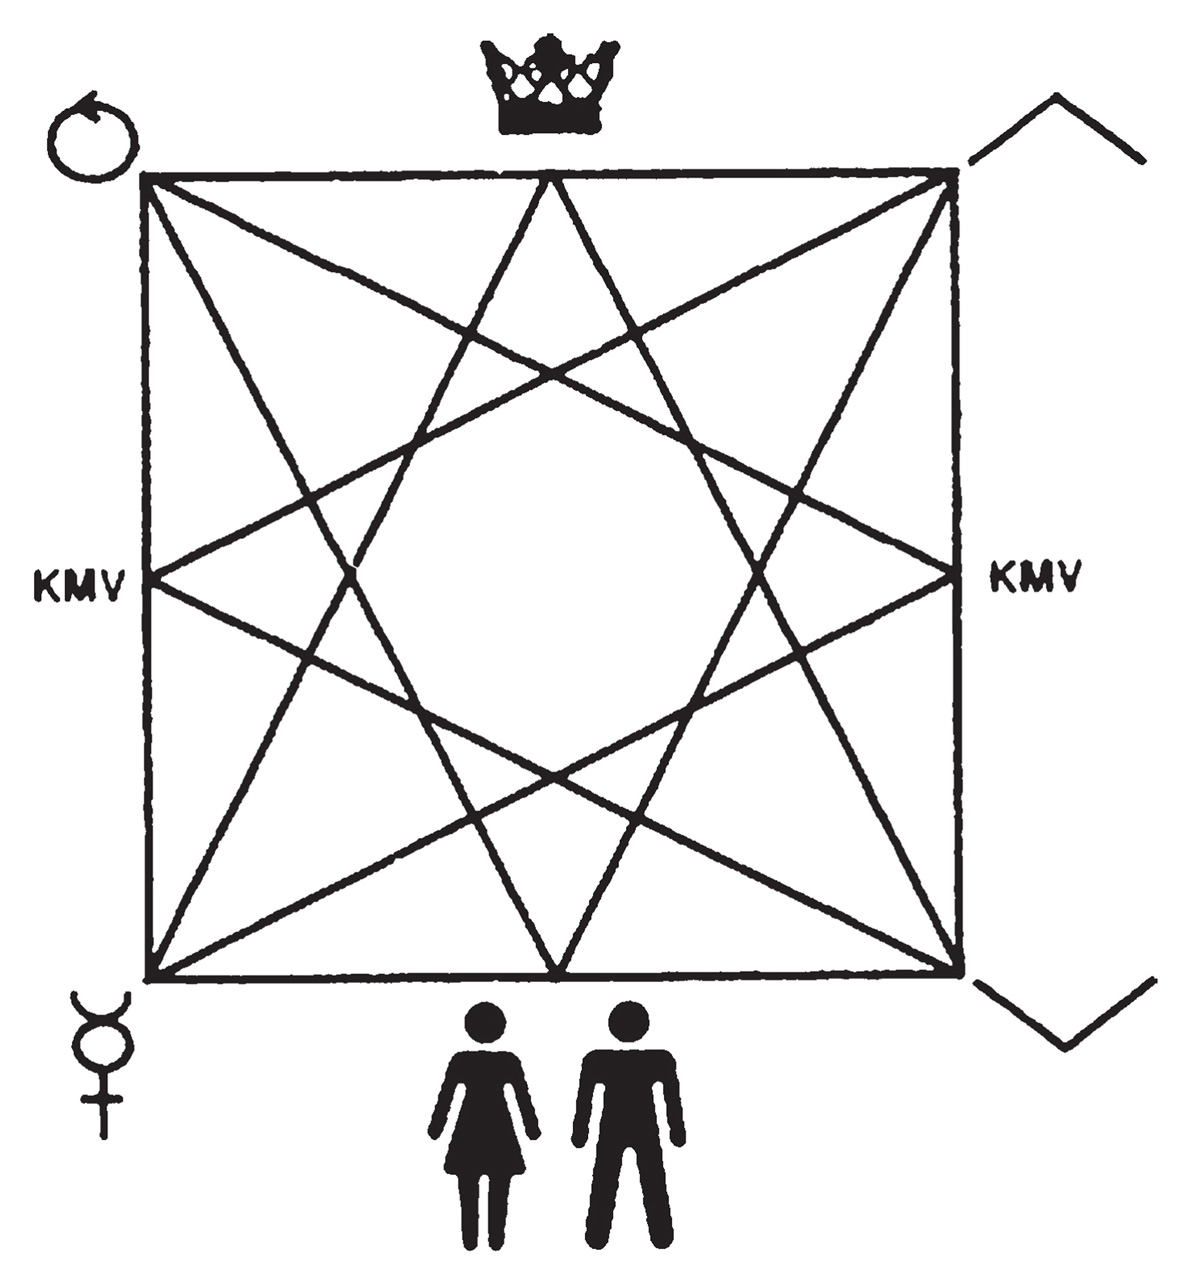 Schematic diagram of the political structure within Elgaland-Vargaland. The constitution guarantees every citizen’s right to move freely within the hierarchy. The acronym KMV stands for “The Materialization of the King in the World.”